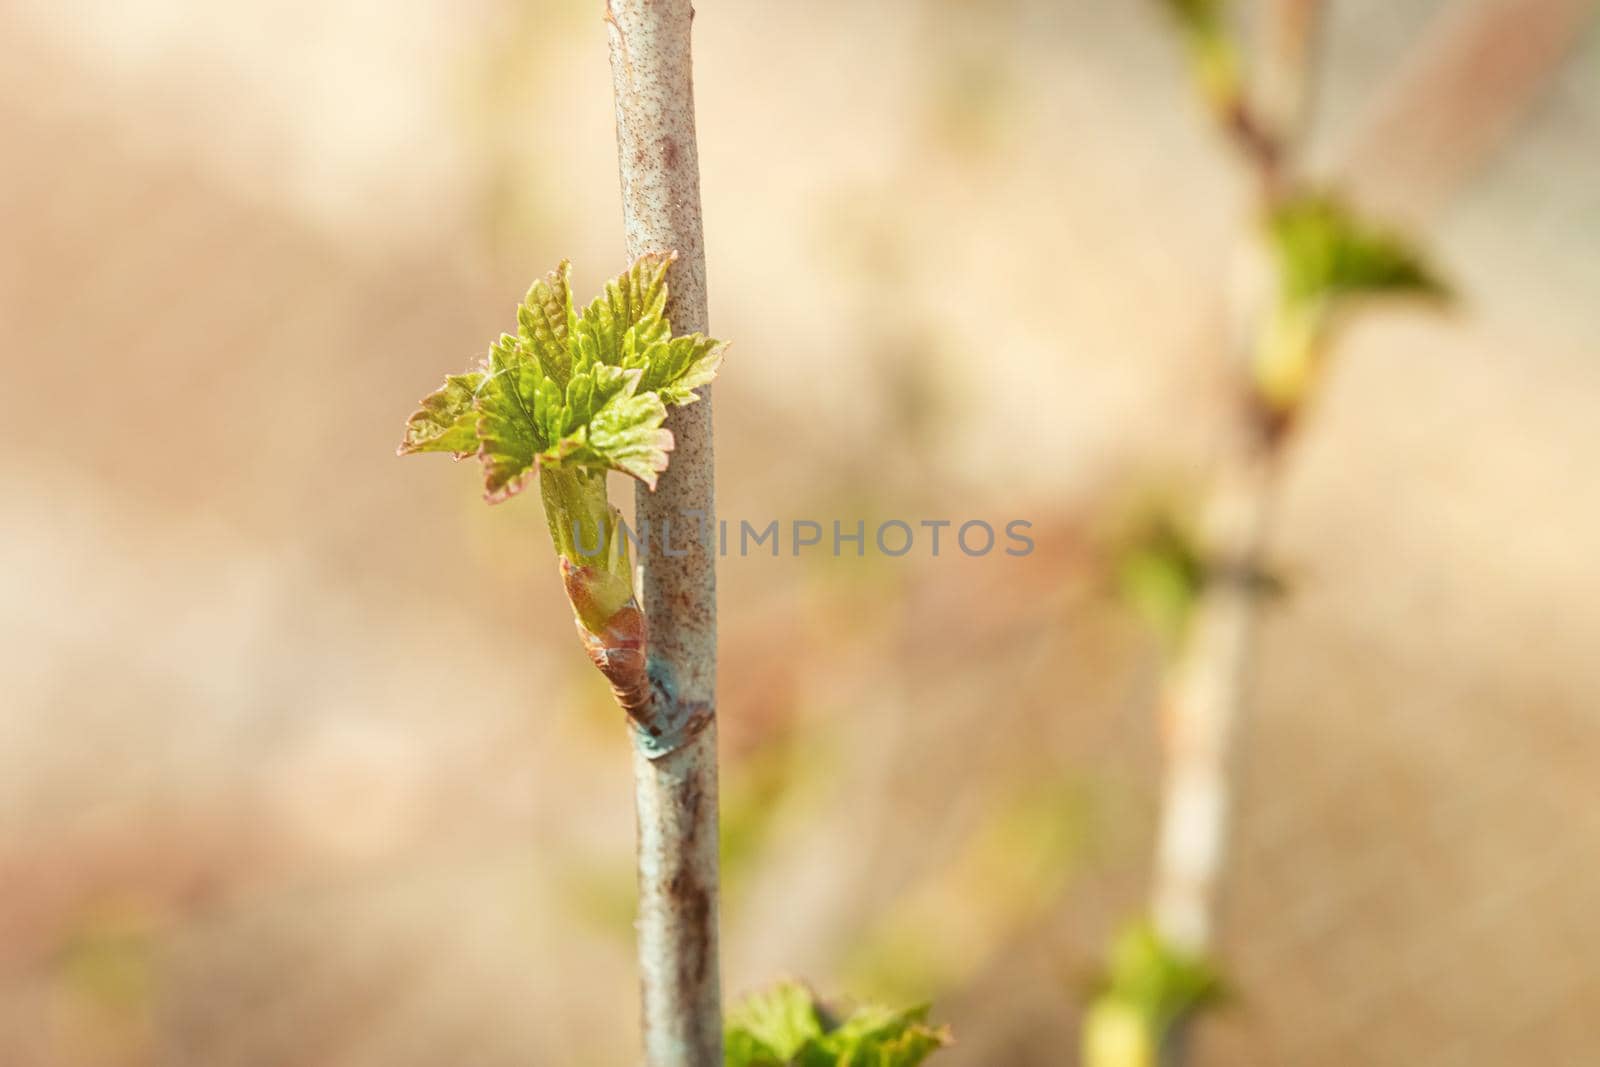 Fresh new green buds on currant branches at springtime garden background by galinasharapova